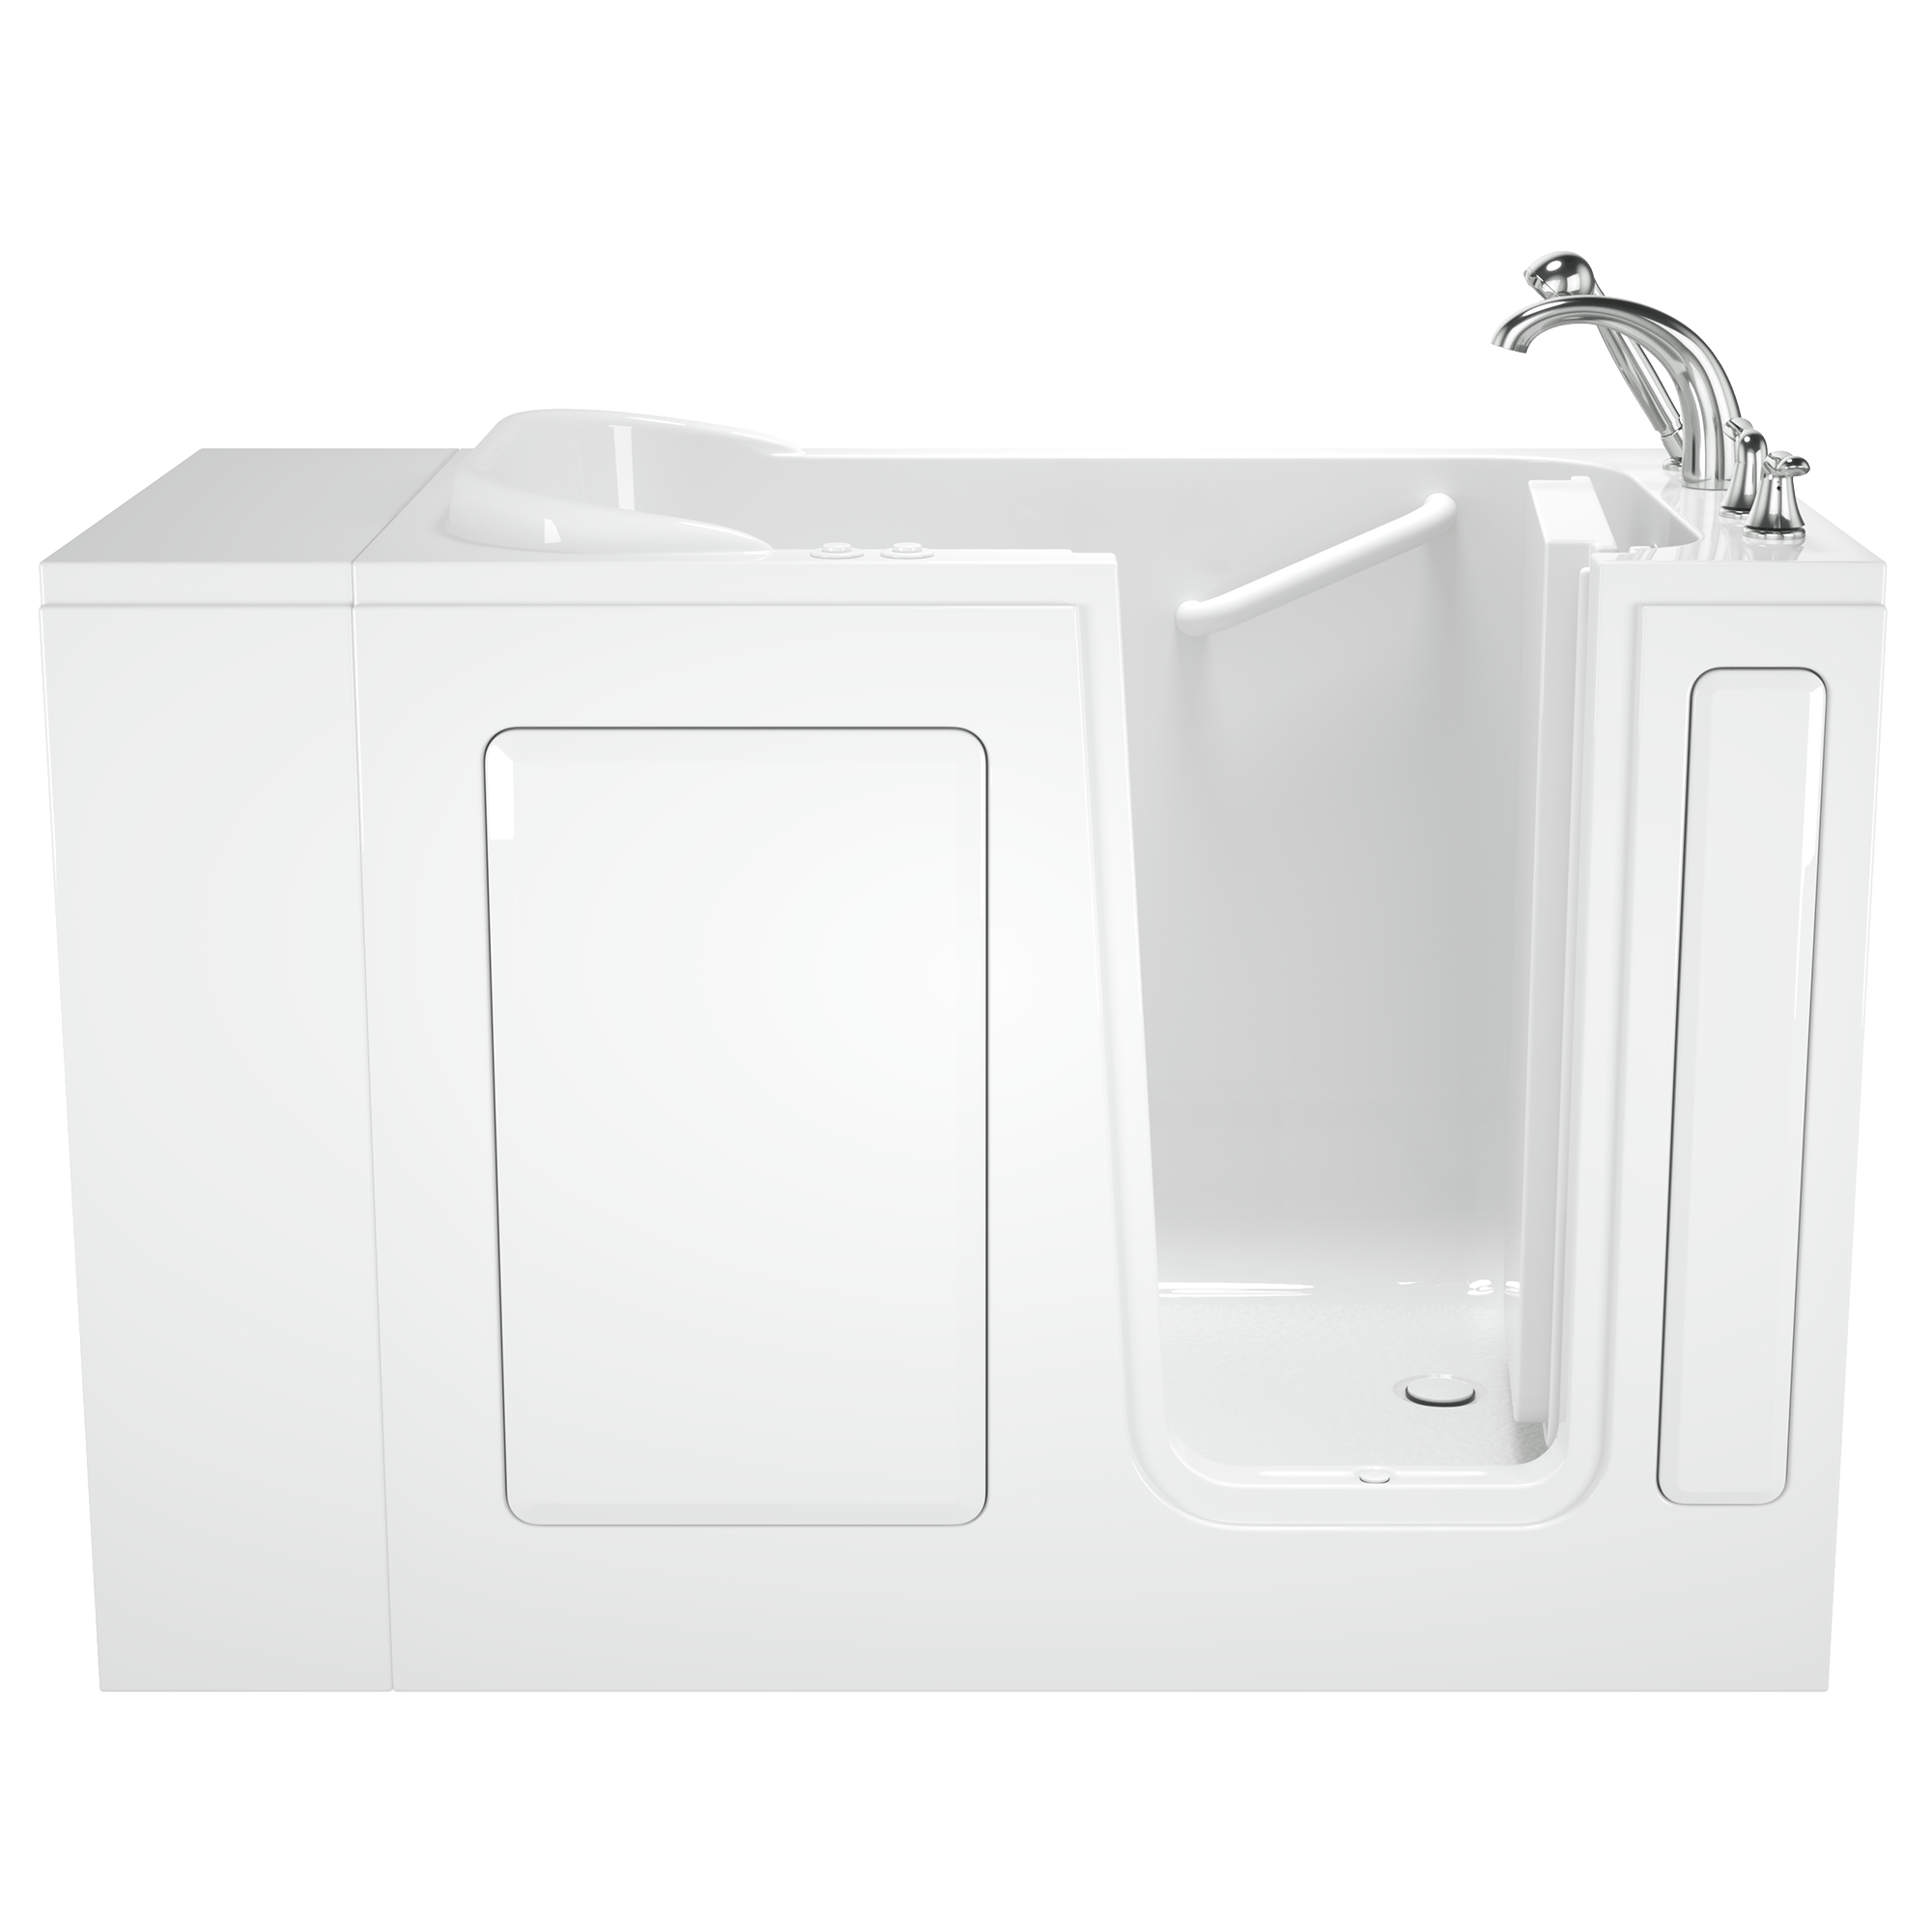 Gelcoat Entry Series 48 x 28-Inch Walk-In Tub With Combination Air Spa and Whirlpool Systems – Right-Hand Drain With Faucet